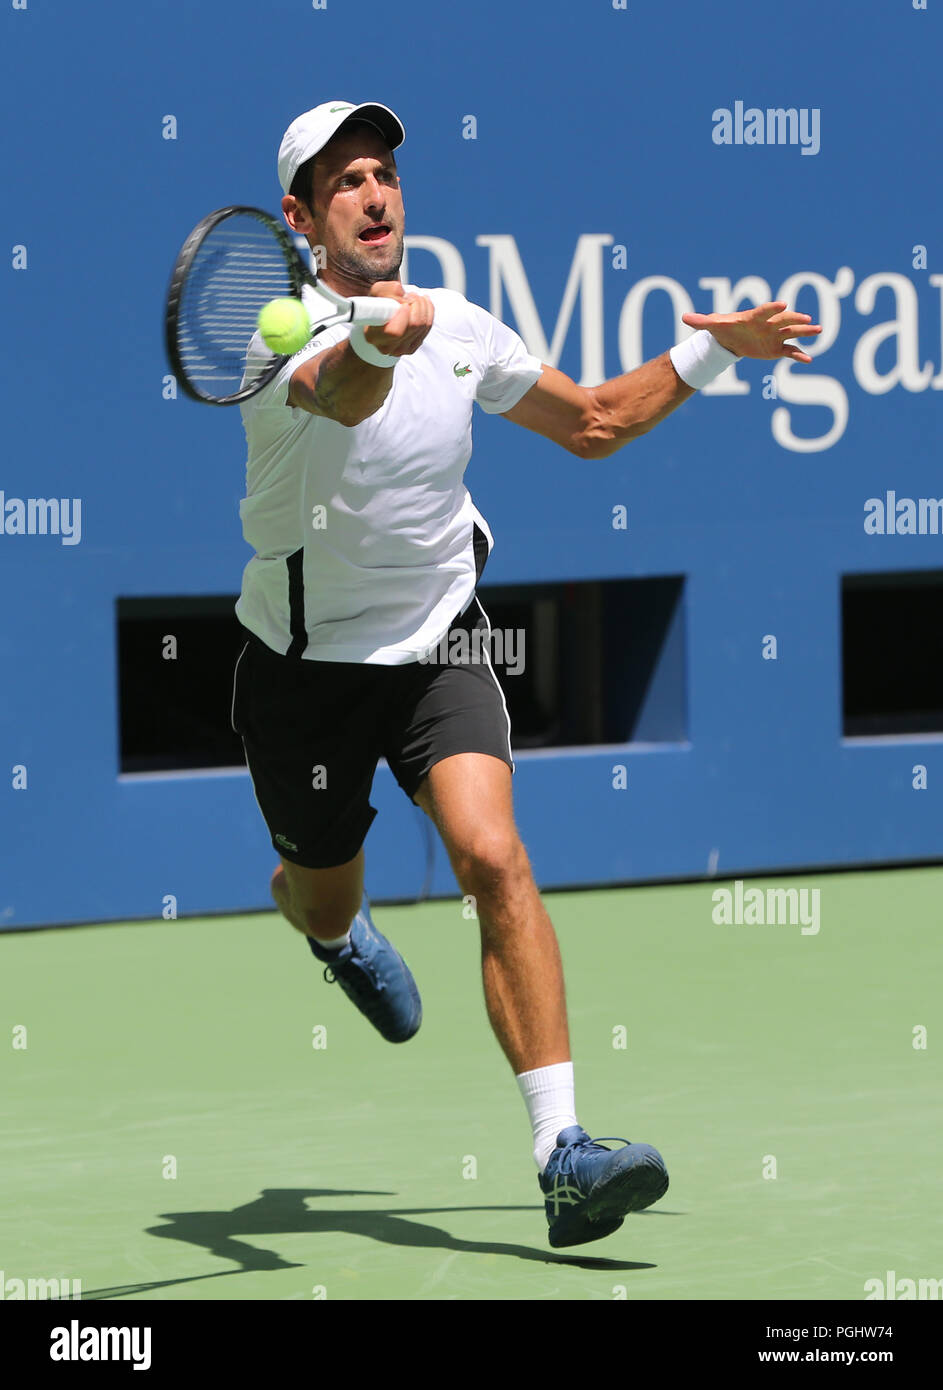 13-time-grand-slam-champion-novak-djokovic-of-serbia-practices-for-the-2018-us-open-at-billie-jean-king-national-tennis-PGHW74.jpg